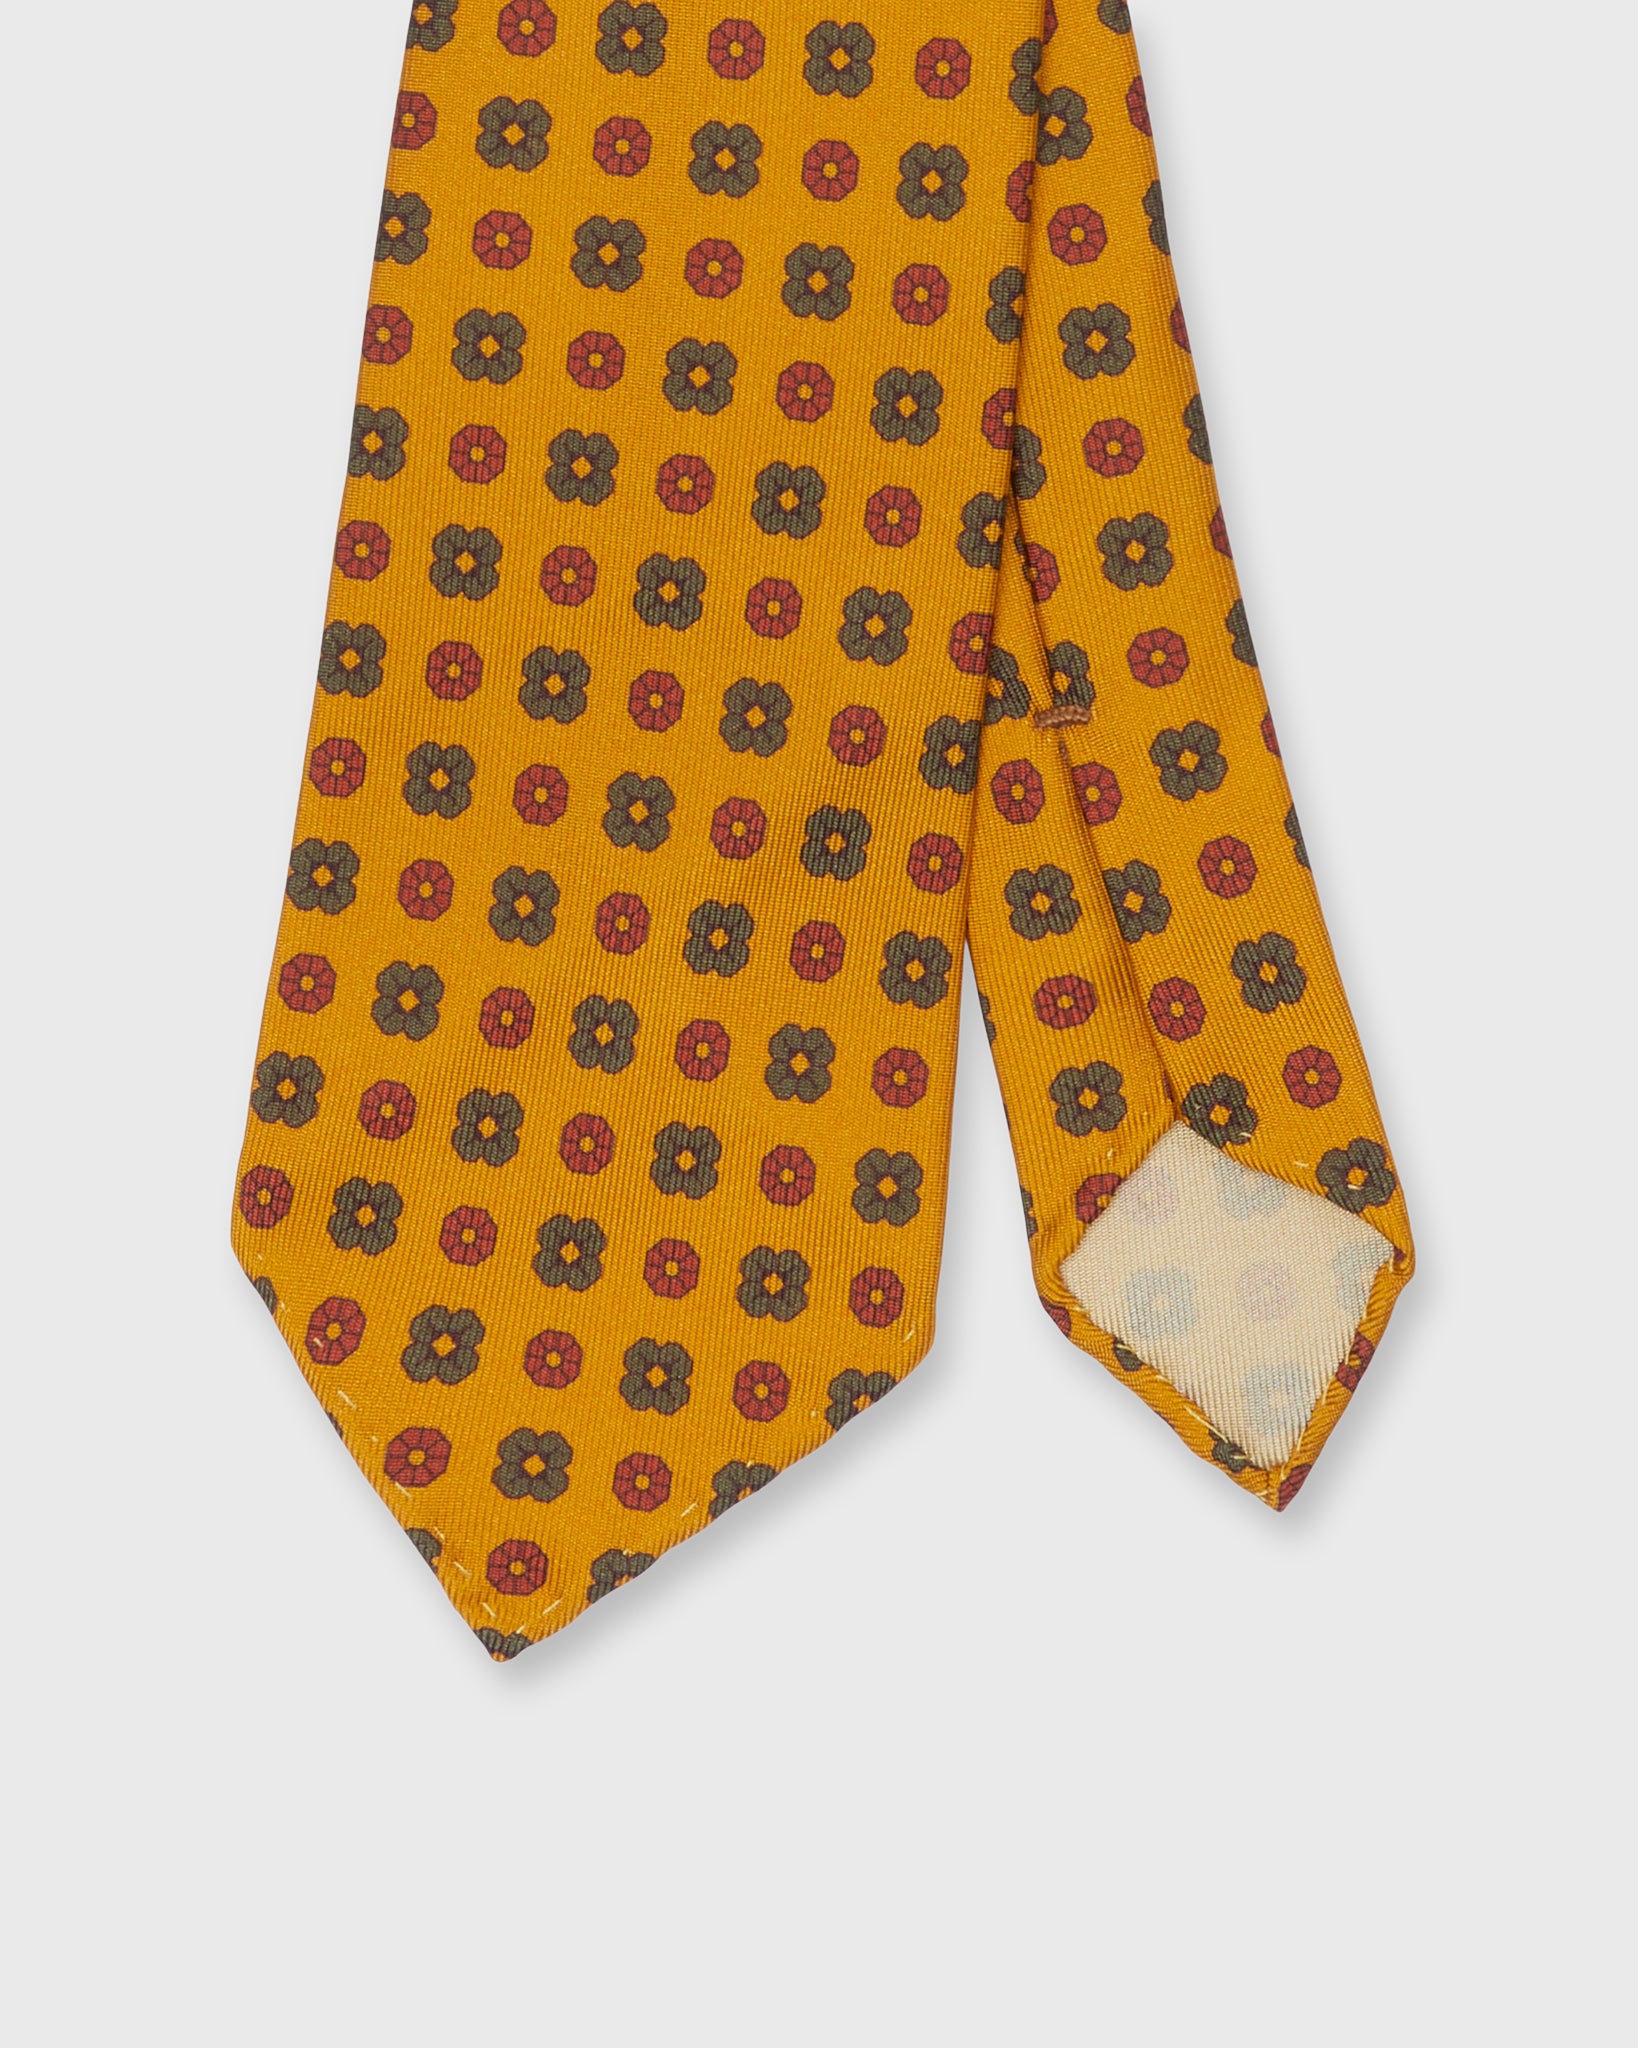 Silk Woven Tie in Gold/Olive/Brick Flowers